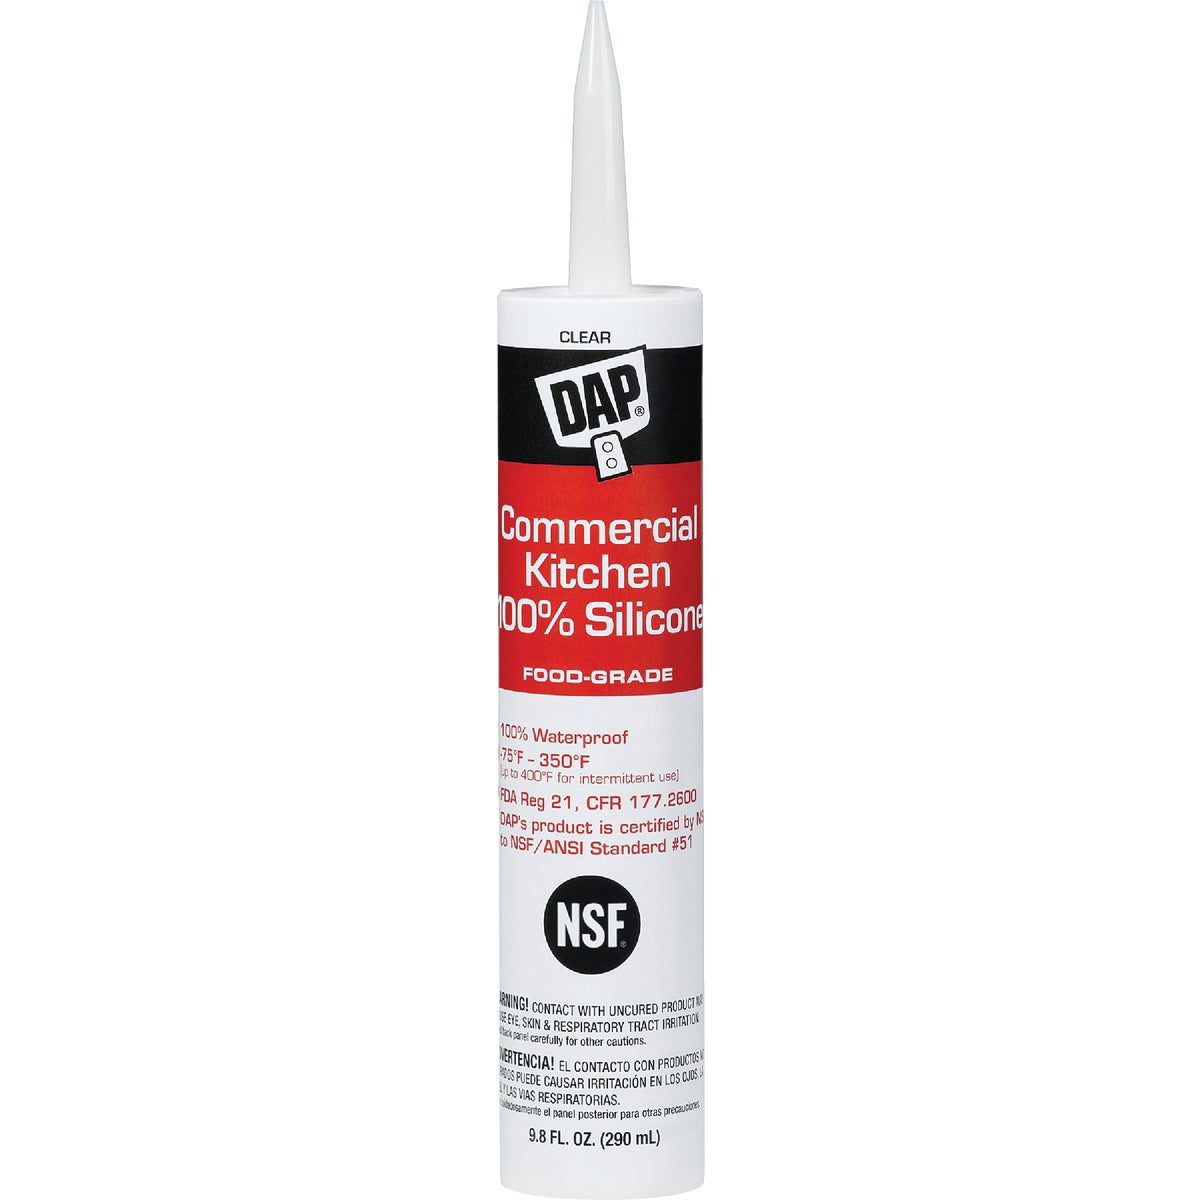 DAP 9.8 Oz. Commercial Kitchen Food-Grade Silicone Sealant, Clear